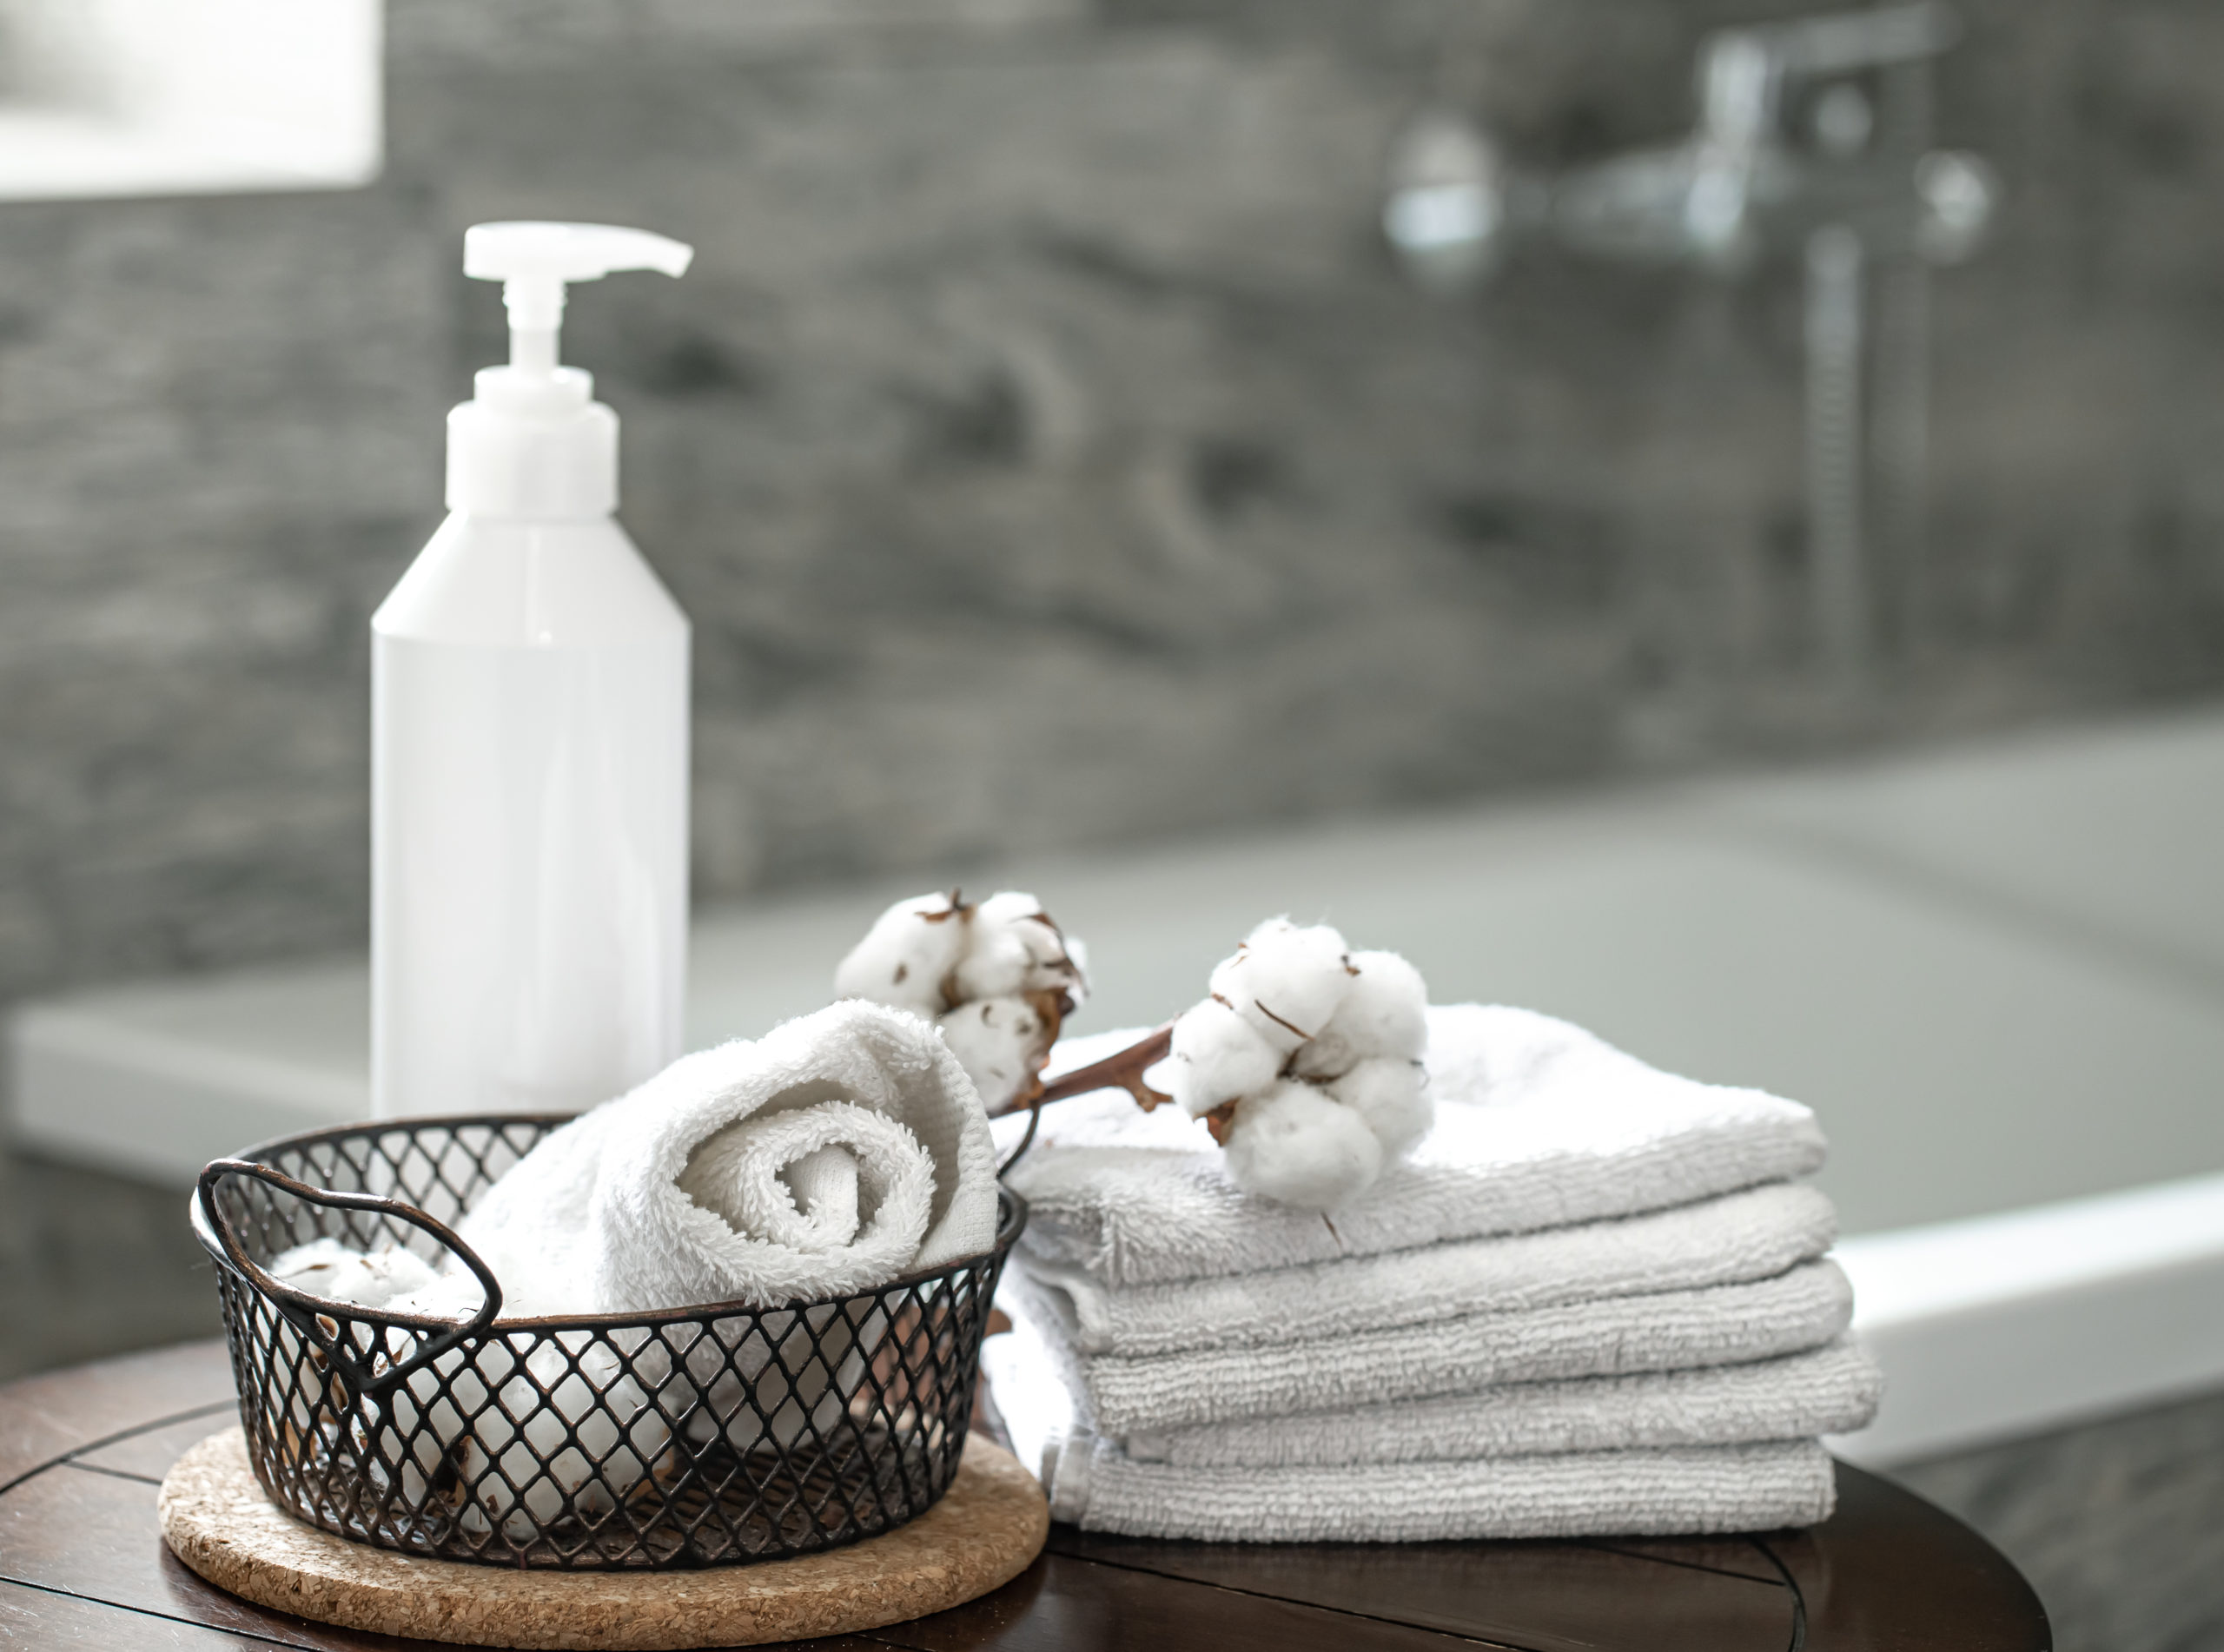 blurred-bathroom-interior-set-clean-folded-towels-copy-space-hygiene-health-concept-scaled